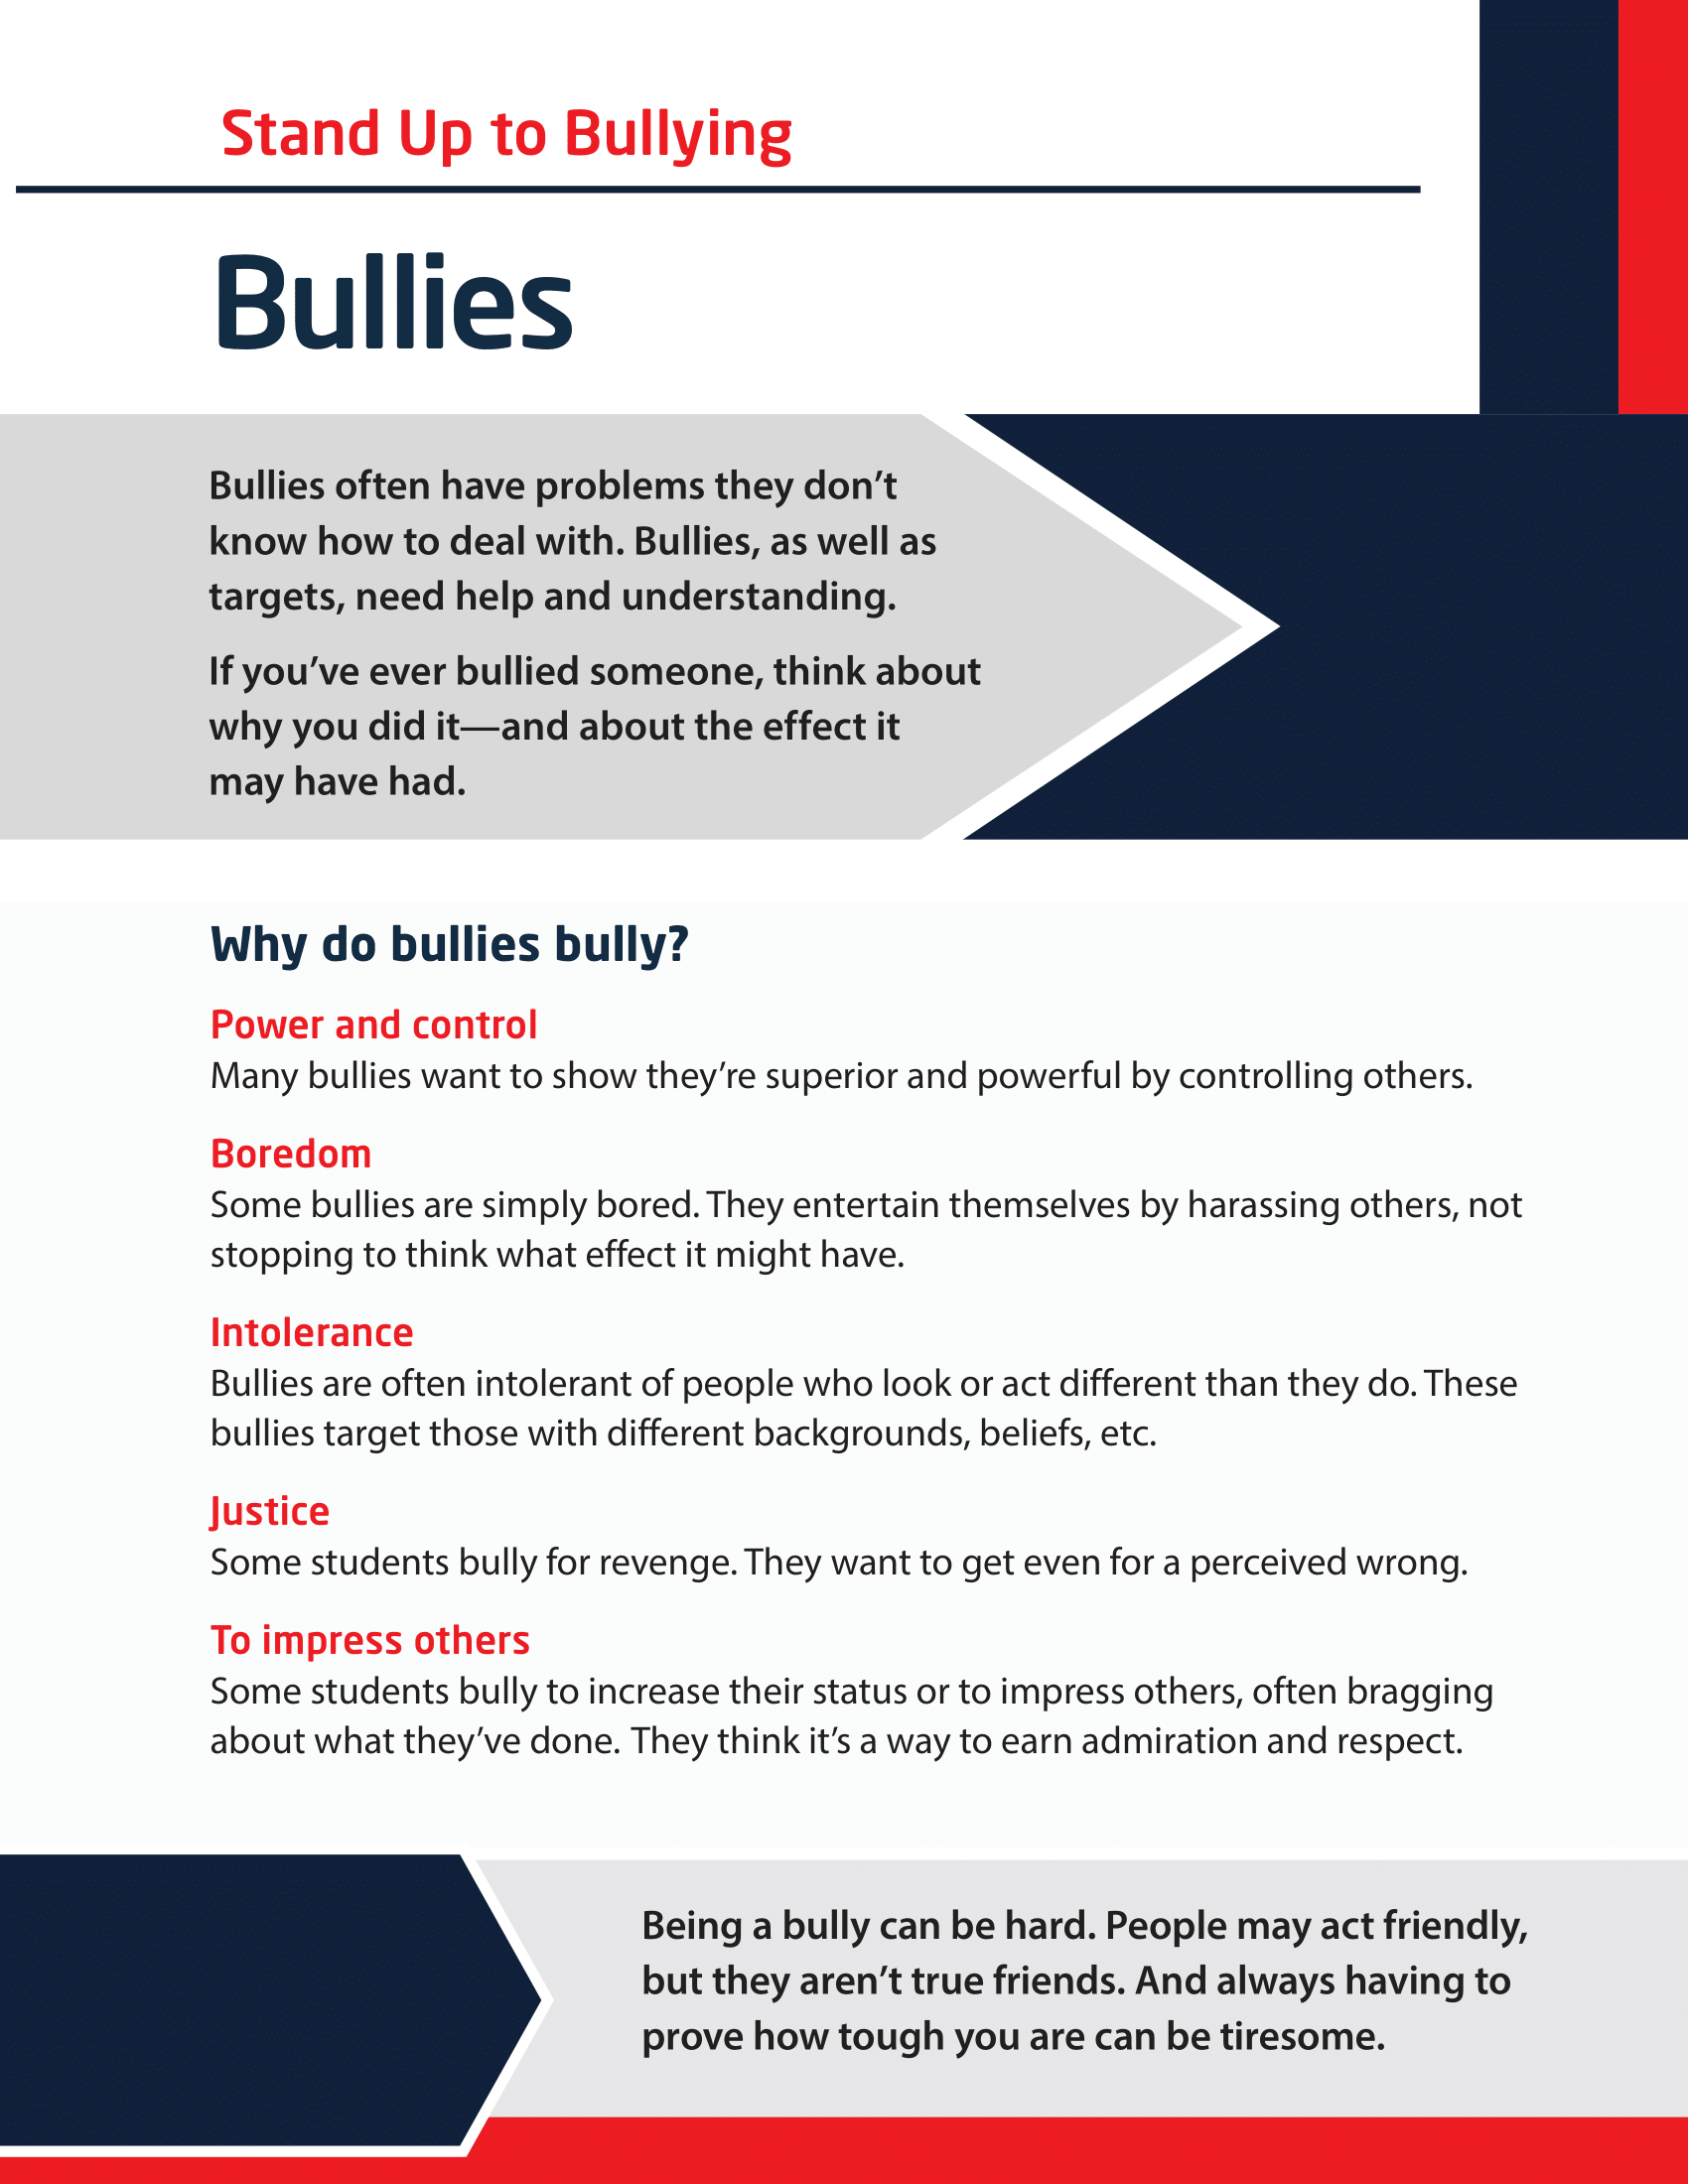 Stand Up to Bullying - Bullies